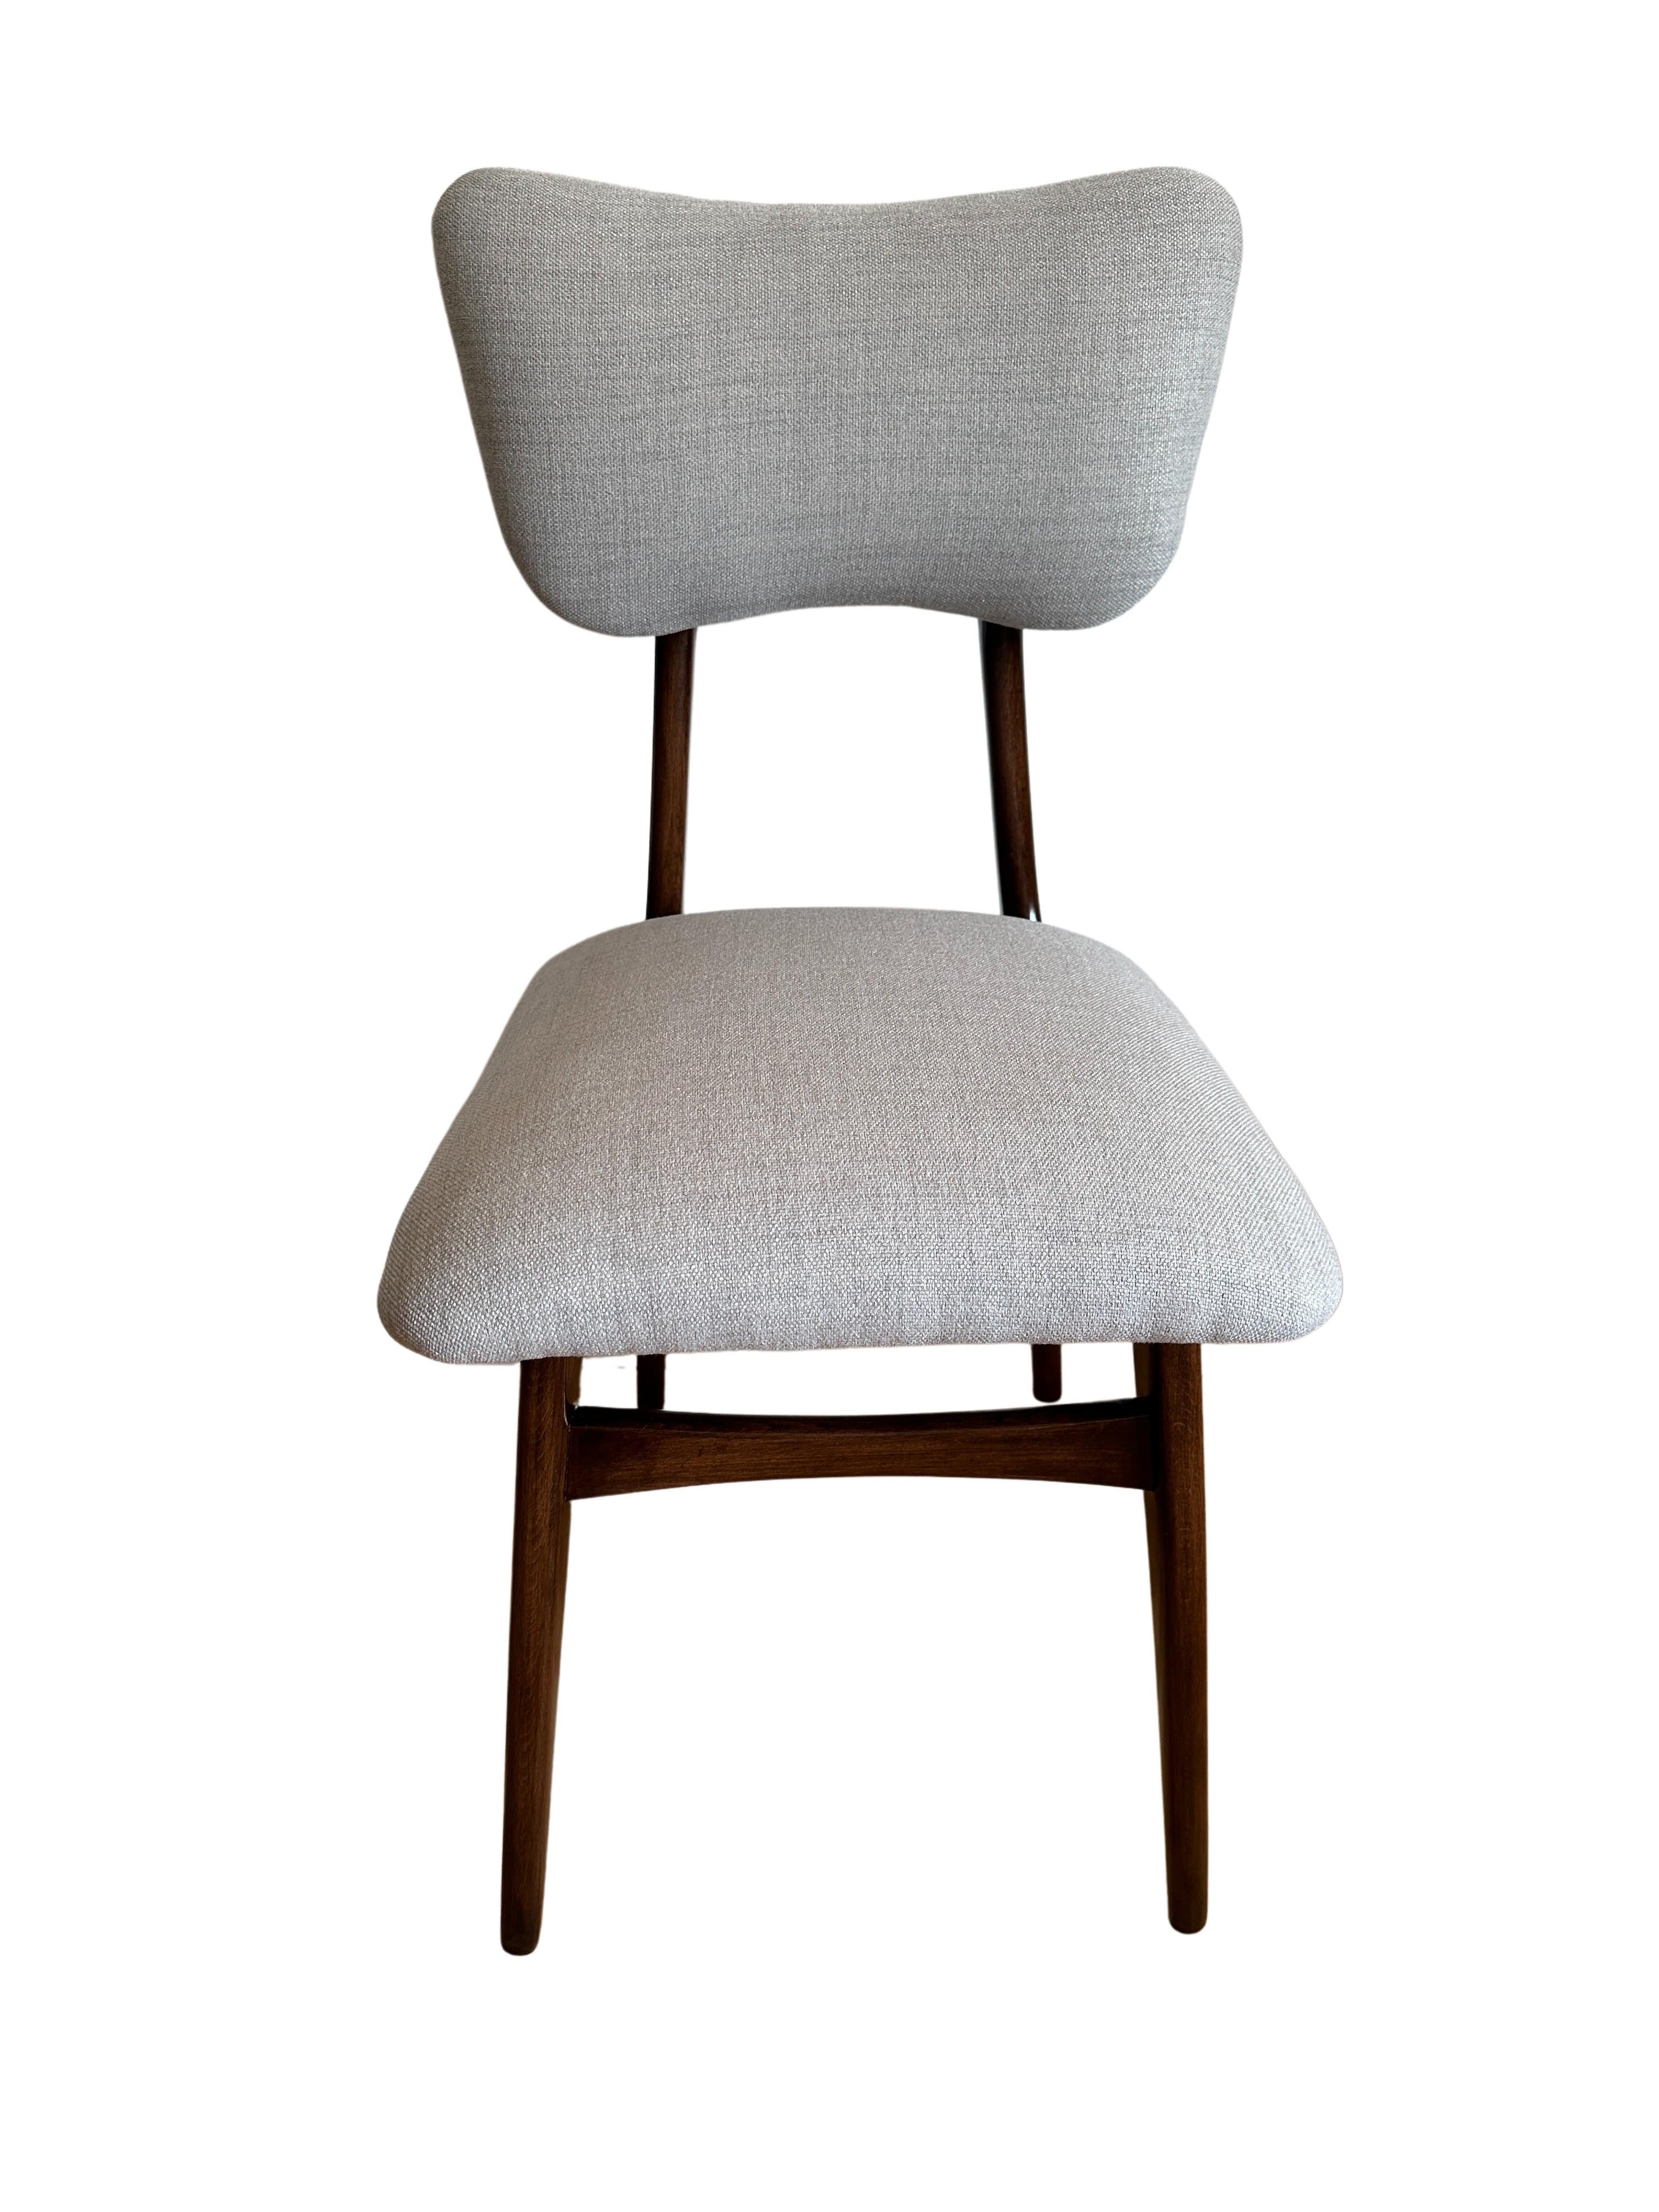 Mid Century Wooden Dining Chair in Grey Upholstery, Poland, 1960s For Sale 6